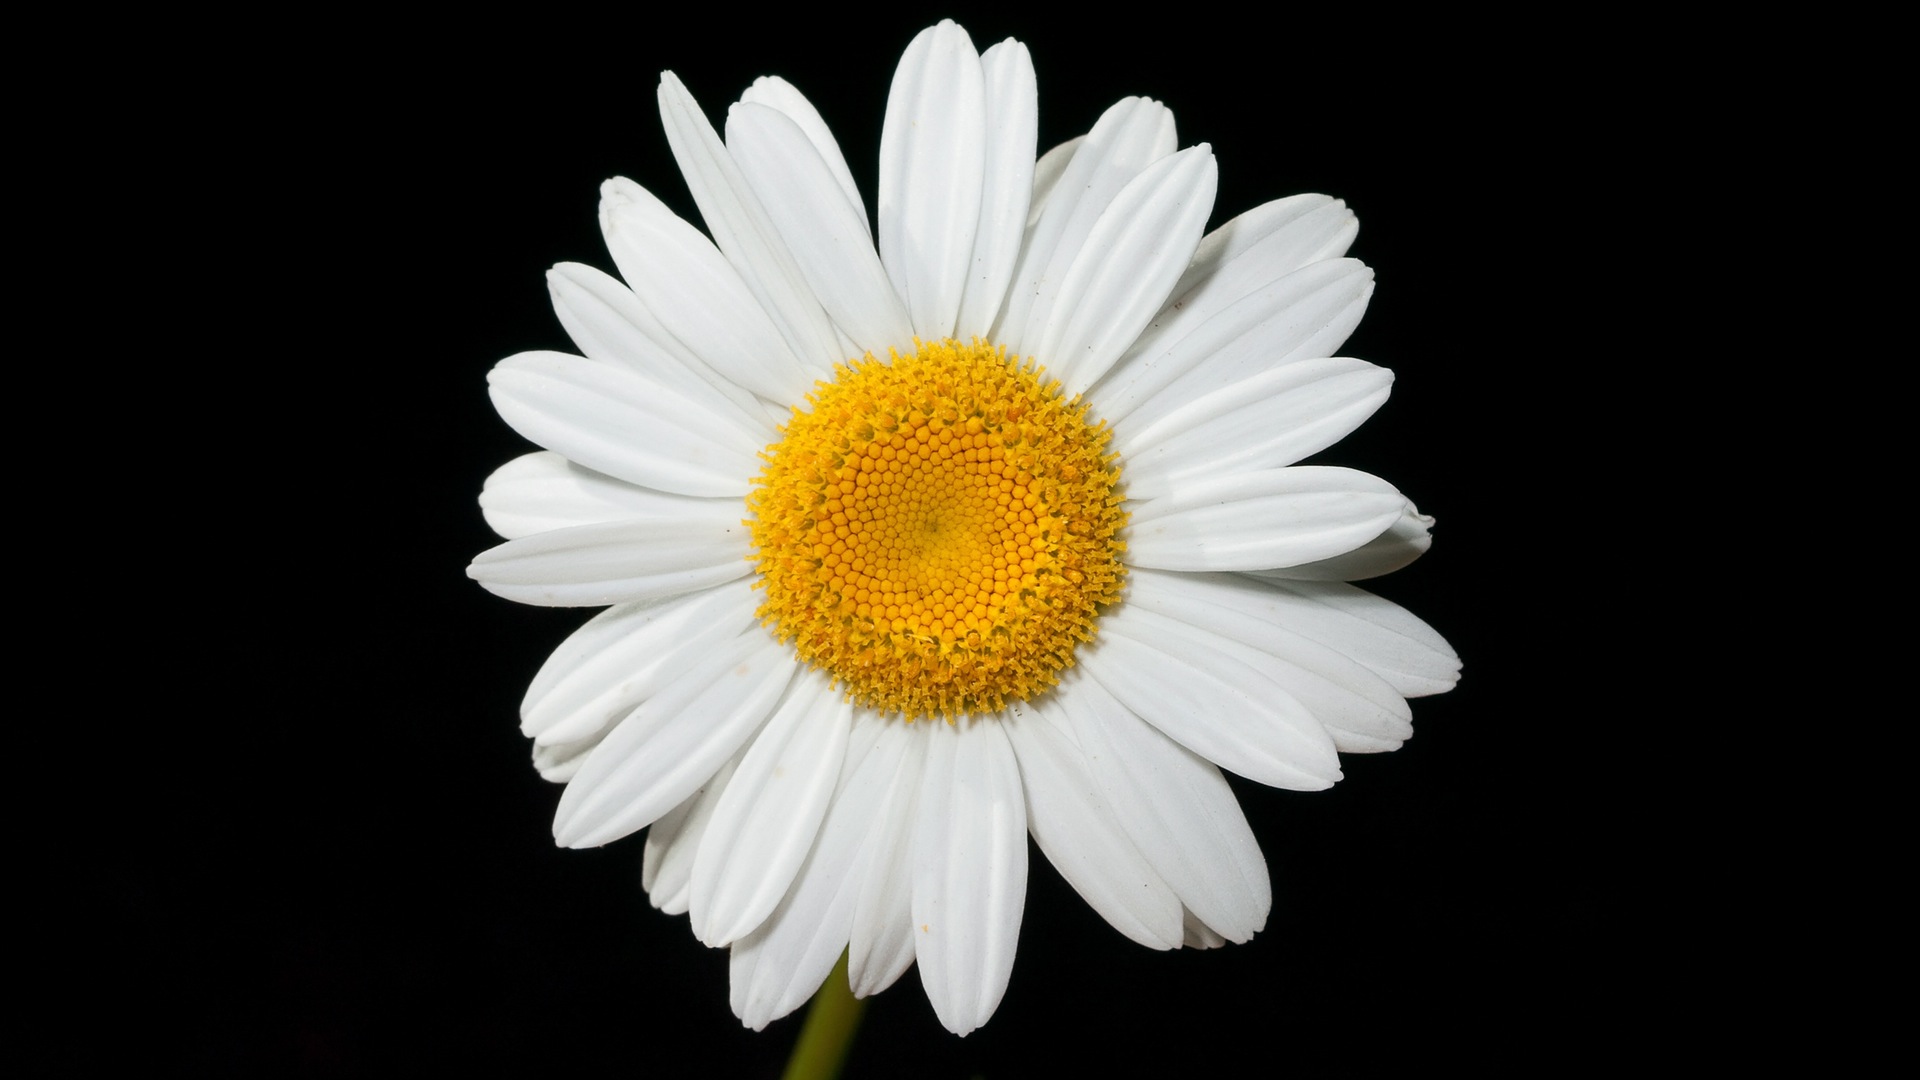 earth, camomile, close up, daisy, flower, white flower, flowers